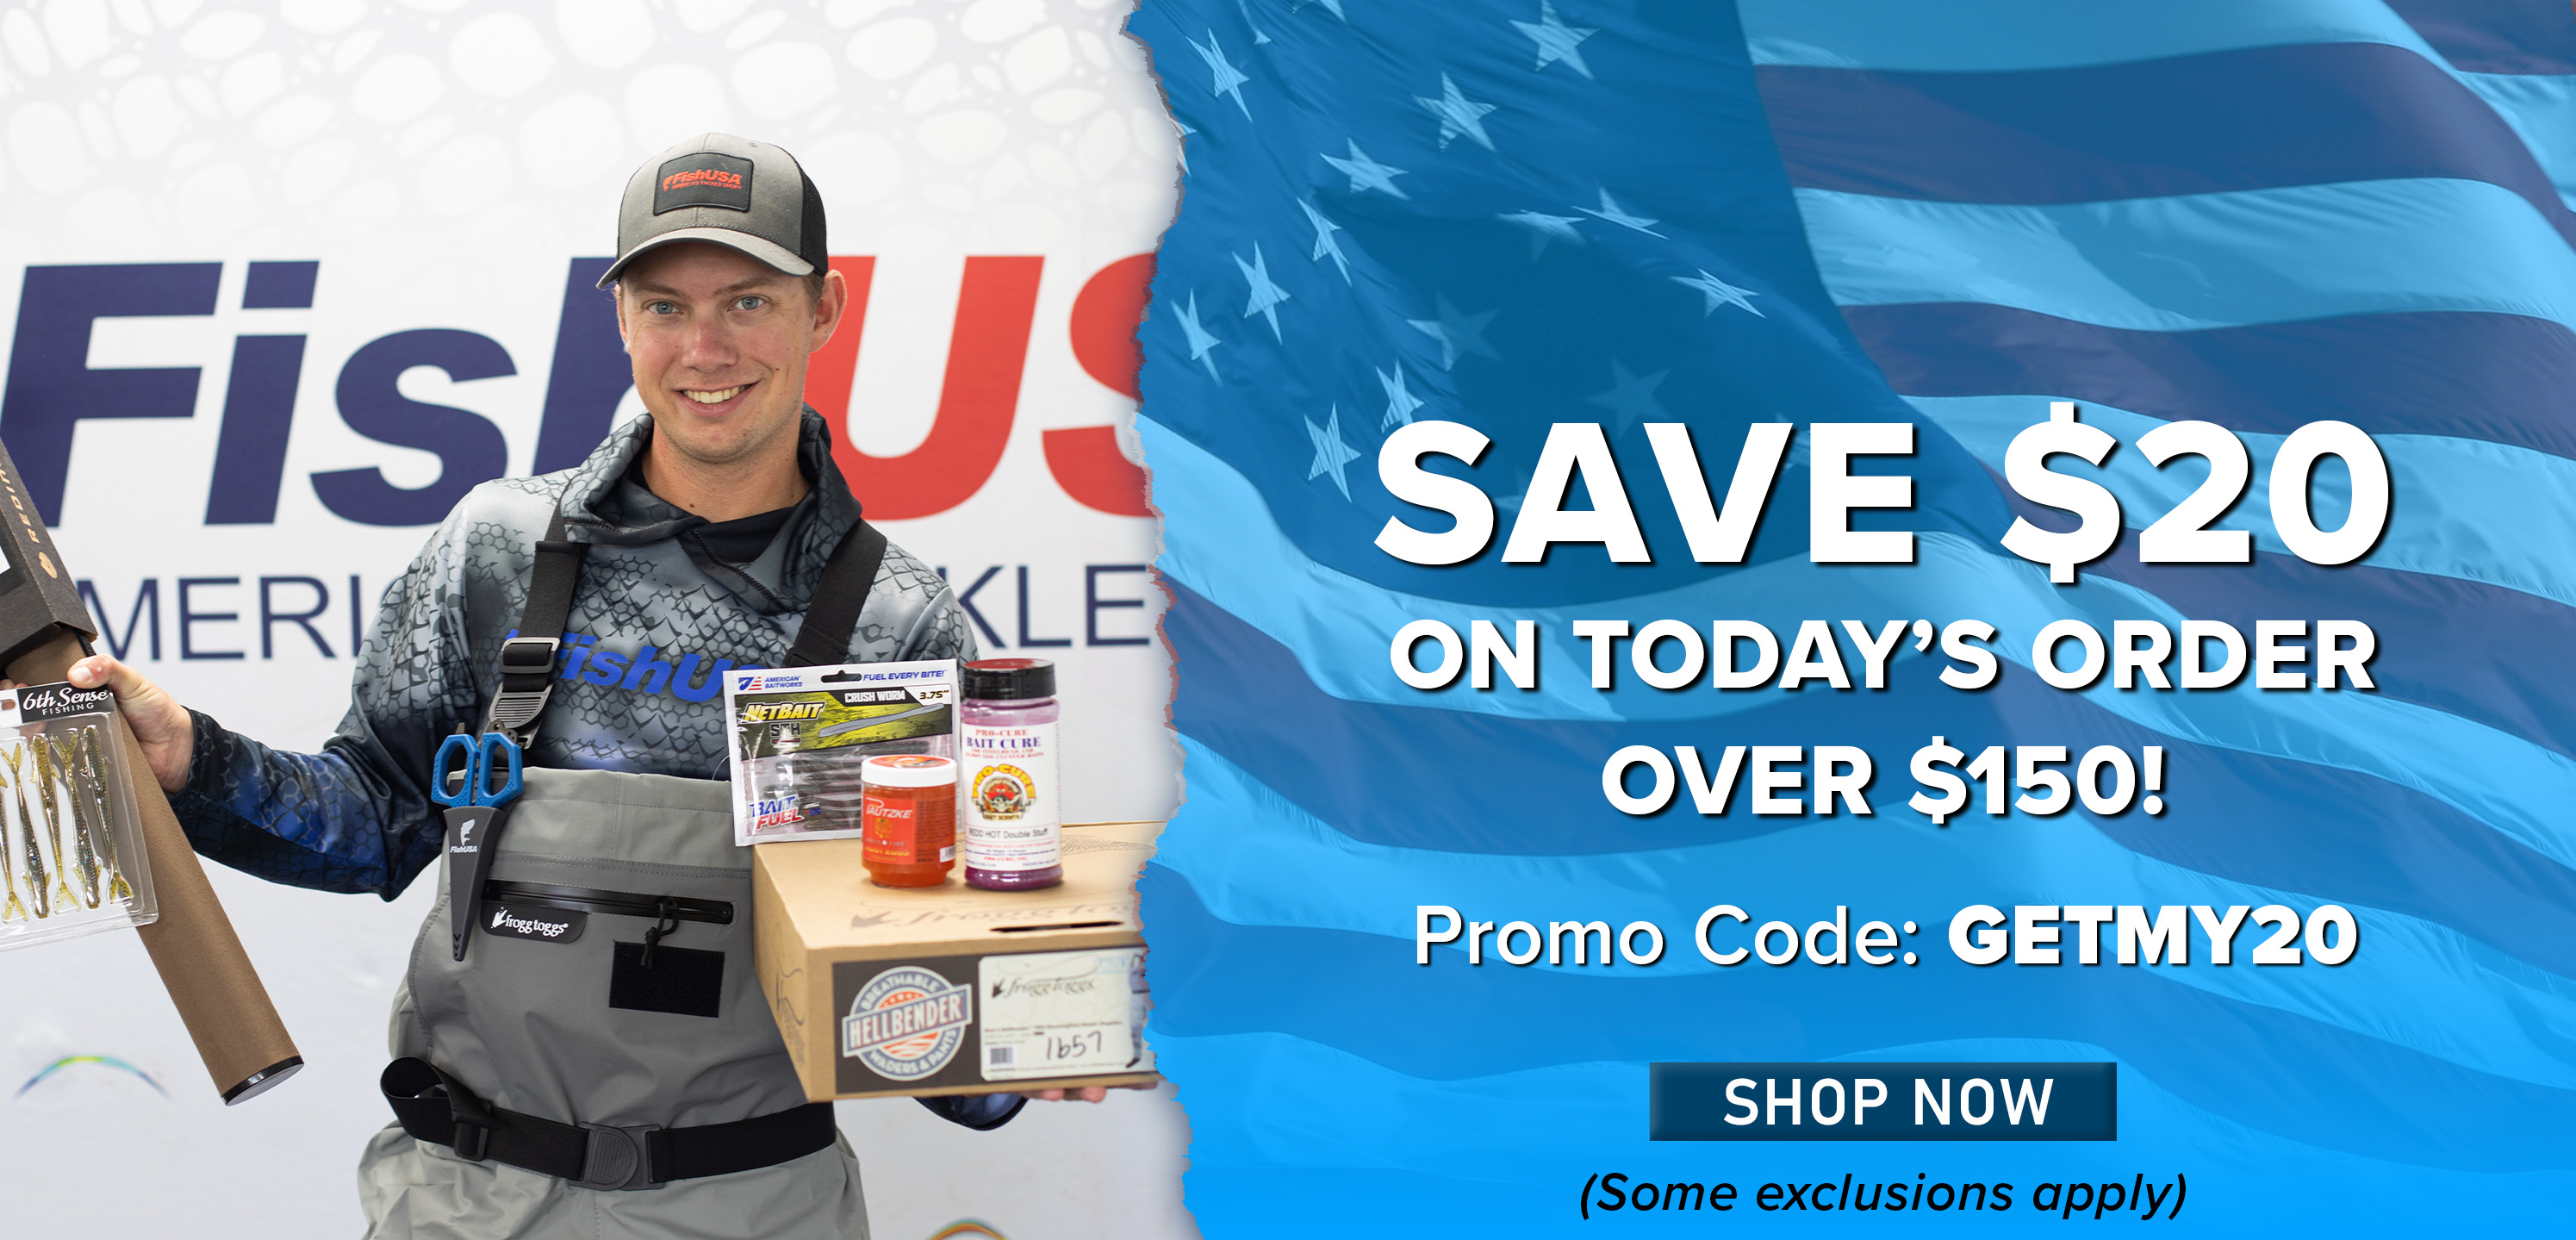 Save $20 On Today's Order Over $150! Promo Code: GETMY20 Shop Now (Some exclusions apply.)